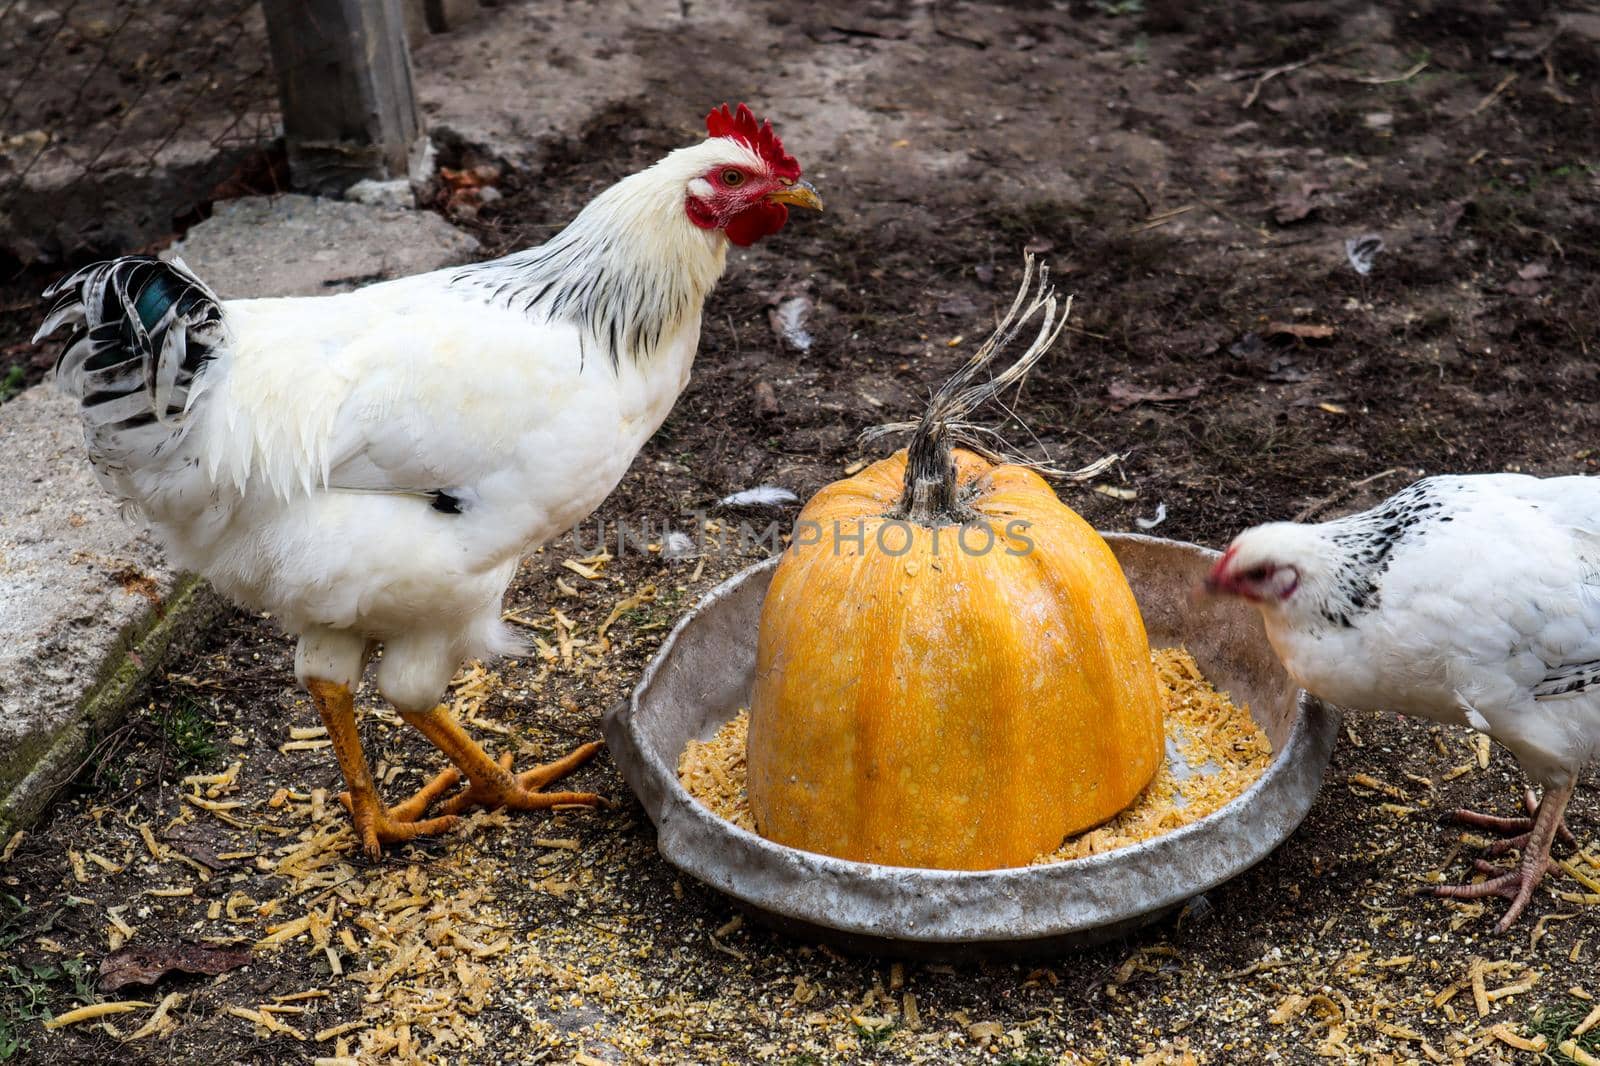 Hens peck grain from an iron bowl in the yard. In an iron bowl is half a sliced ​​yellow pumpkin